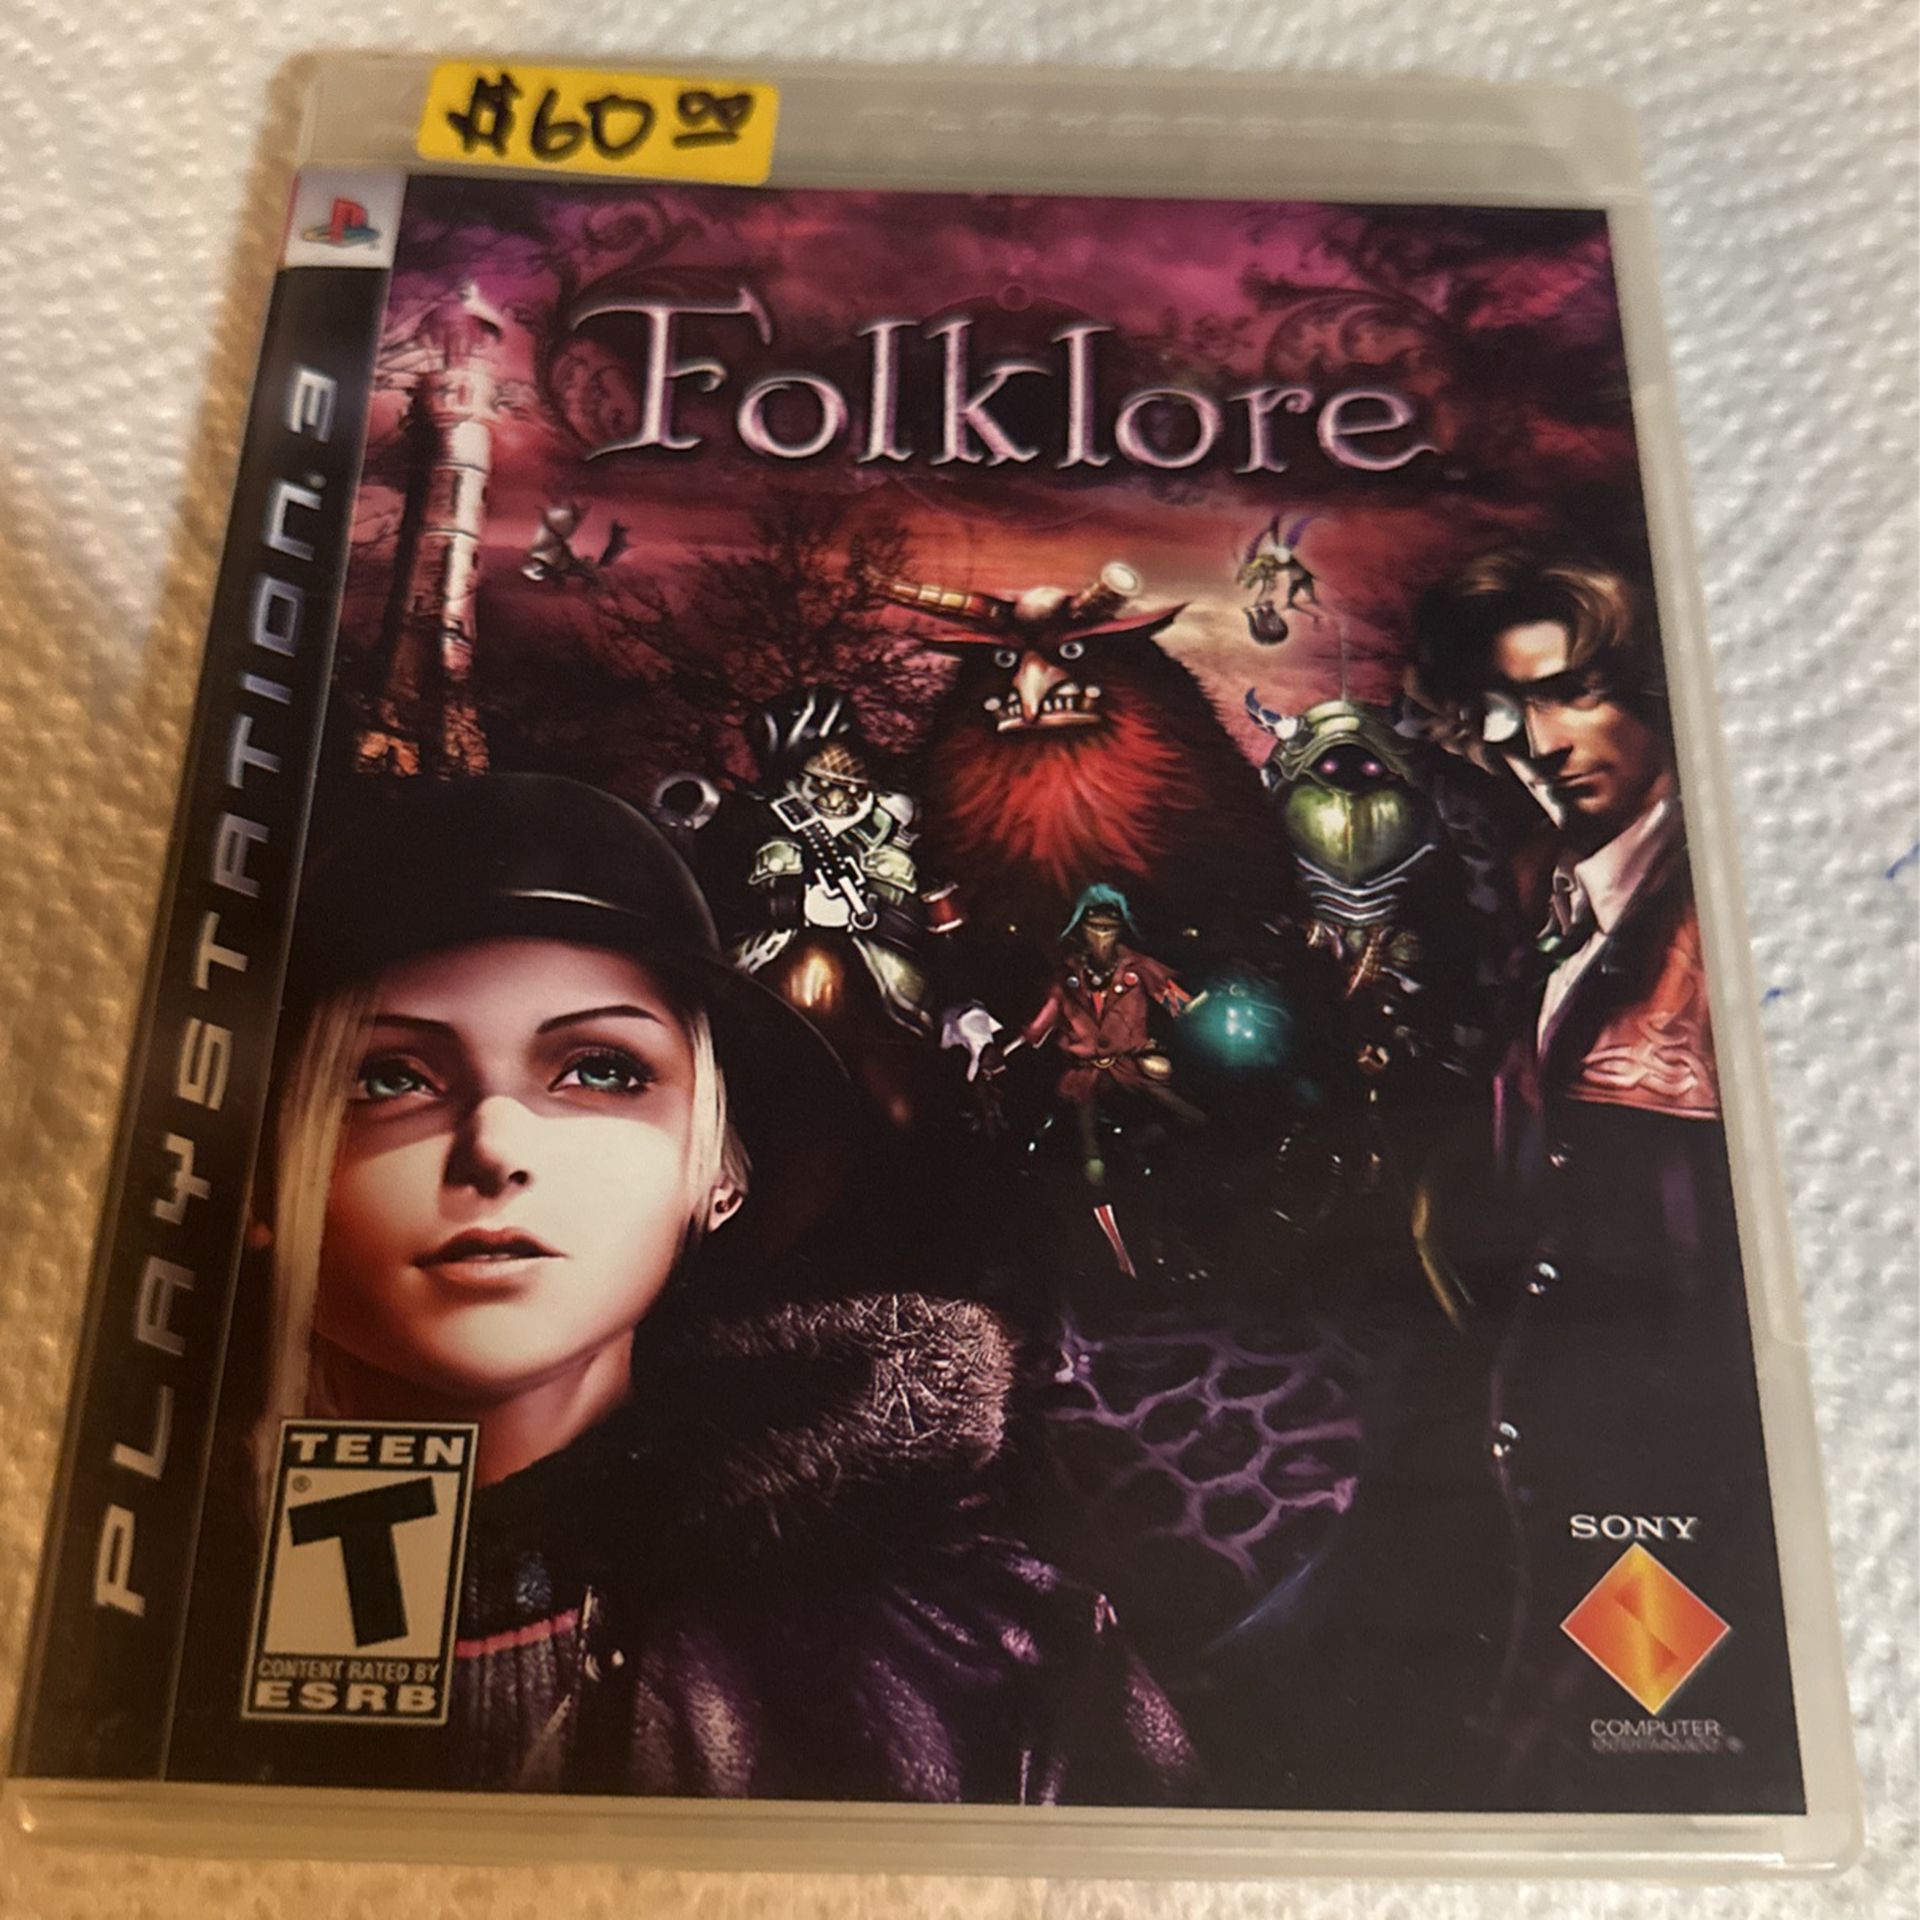 Ps3 Folklore